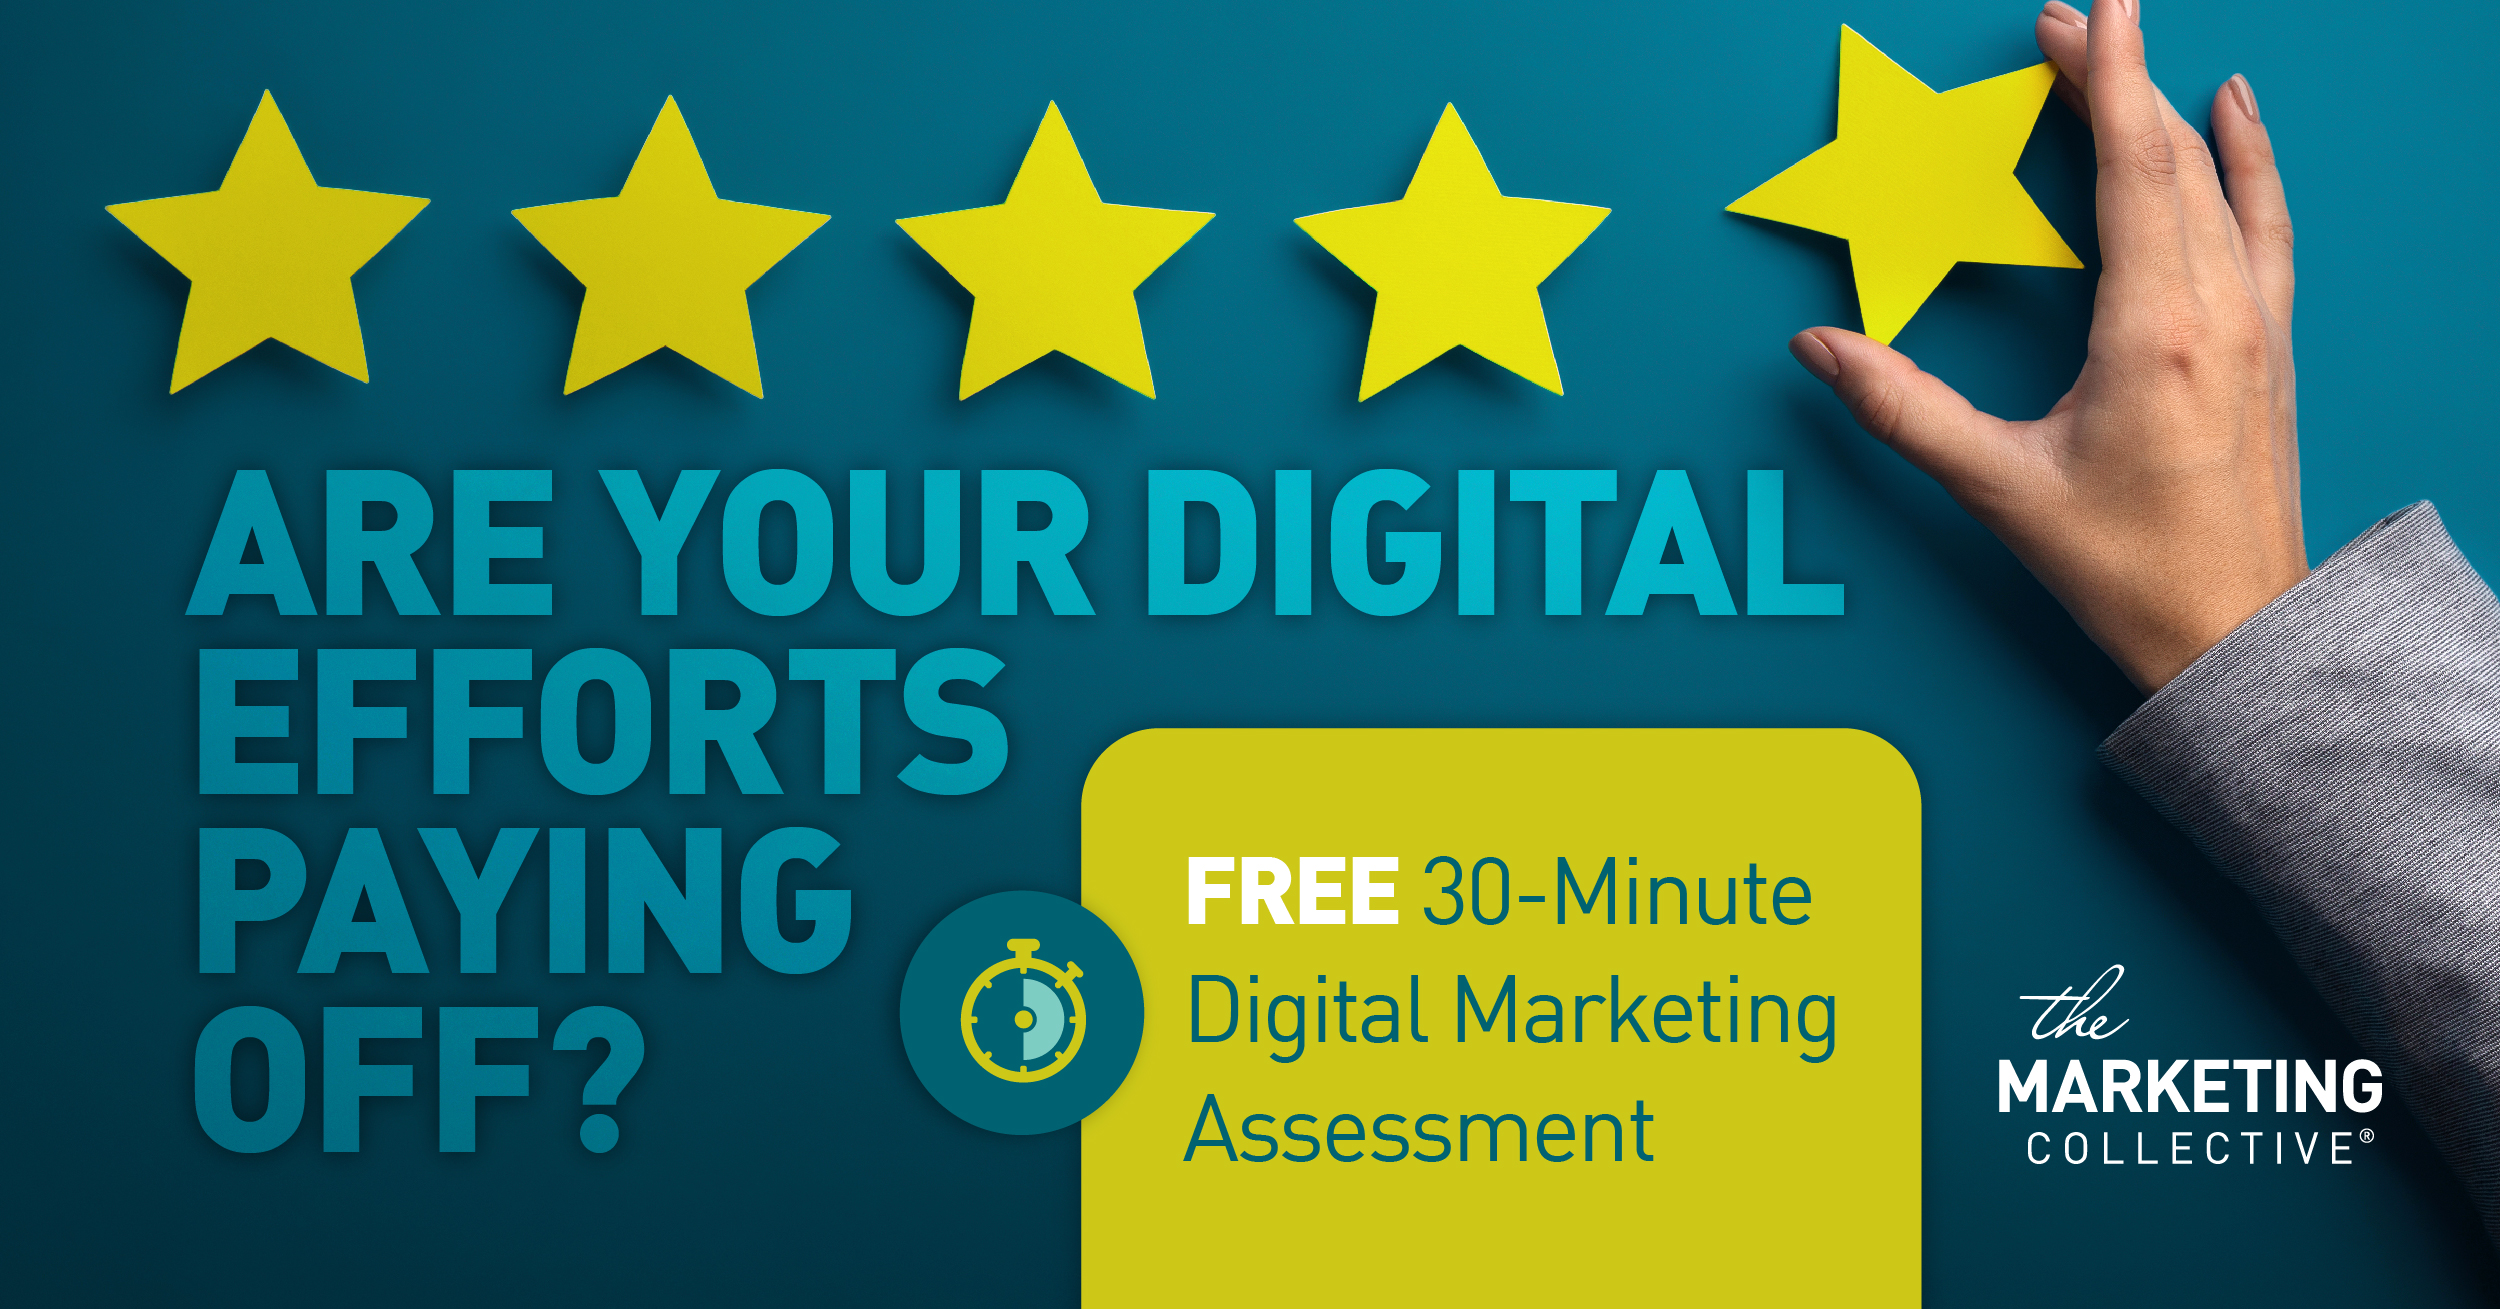 Are your digital efforts paying off? The Marketing Collective logo. 5 gold stars. 